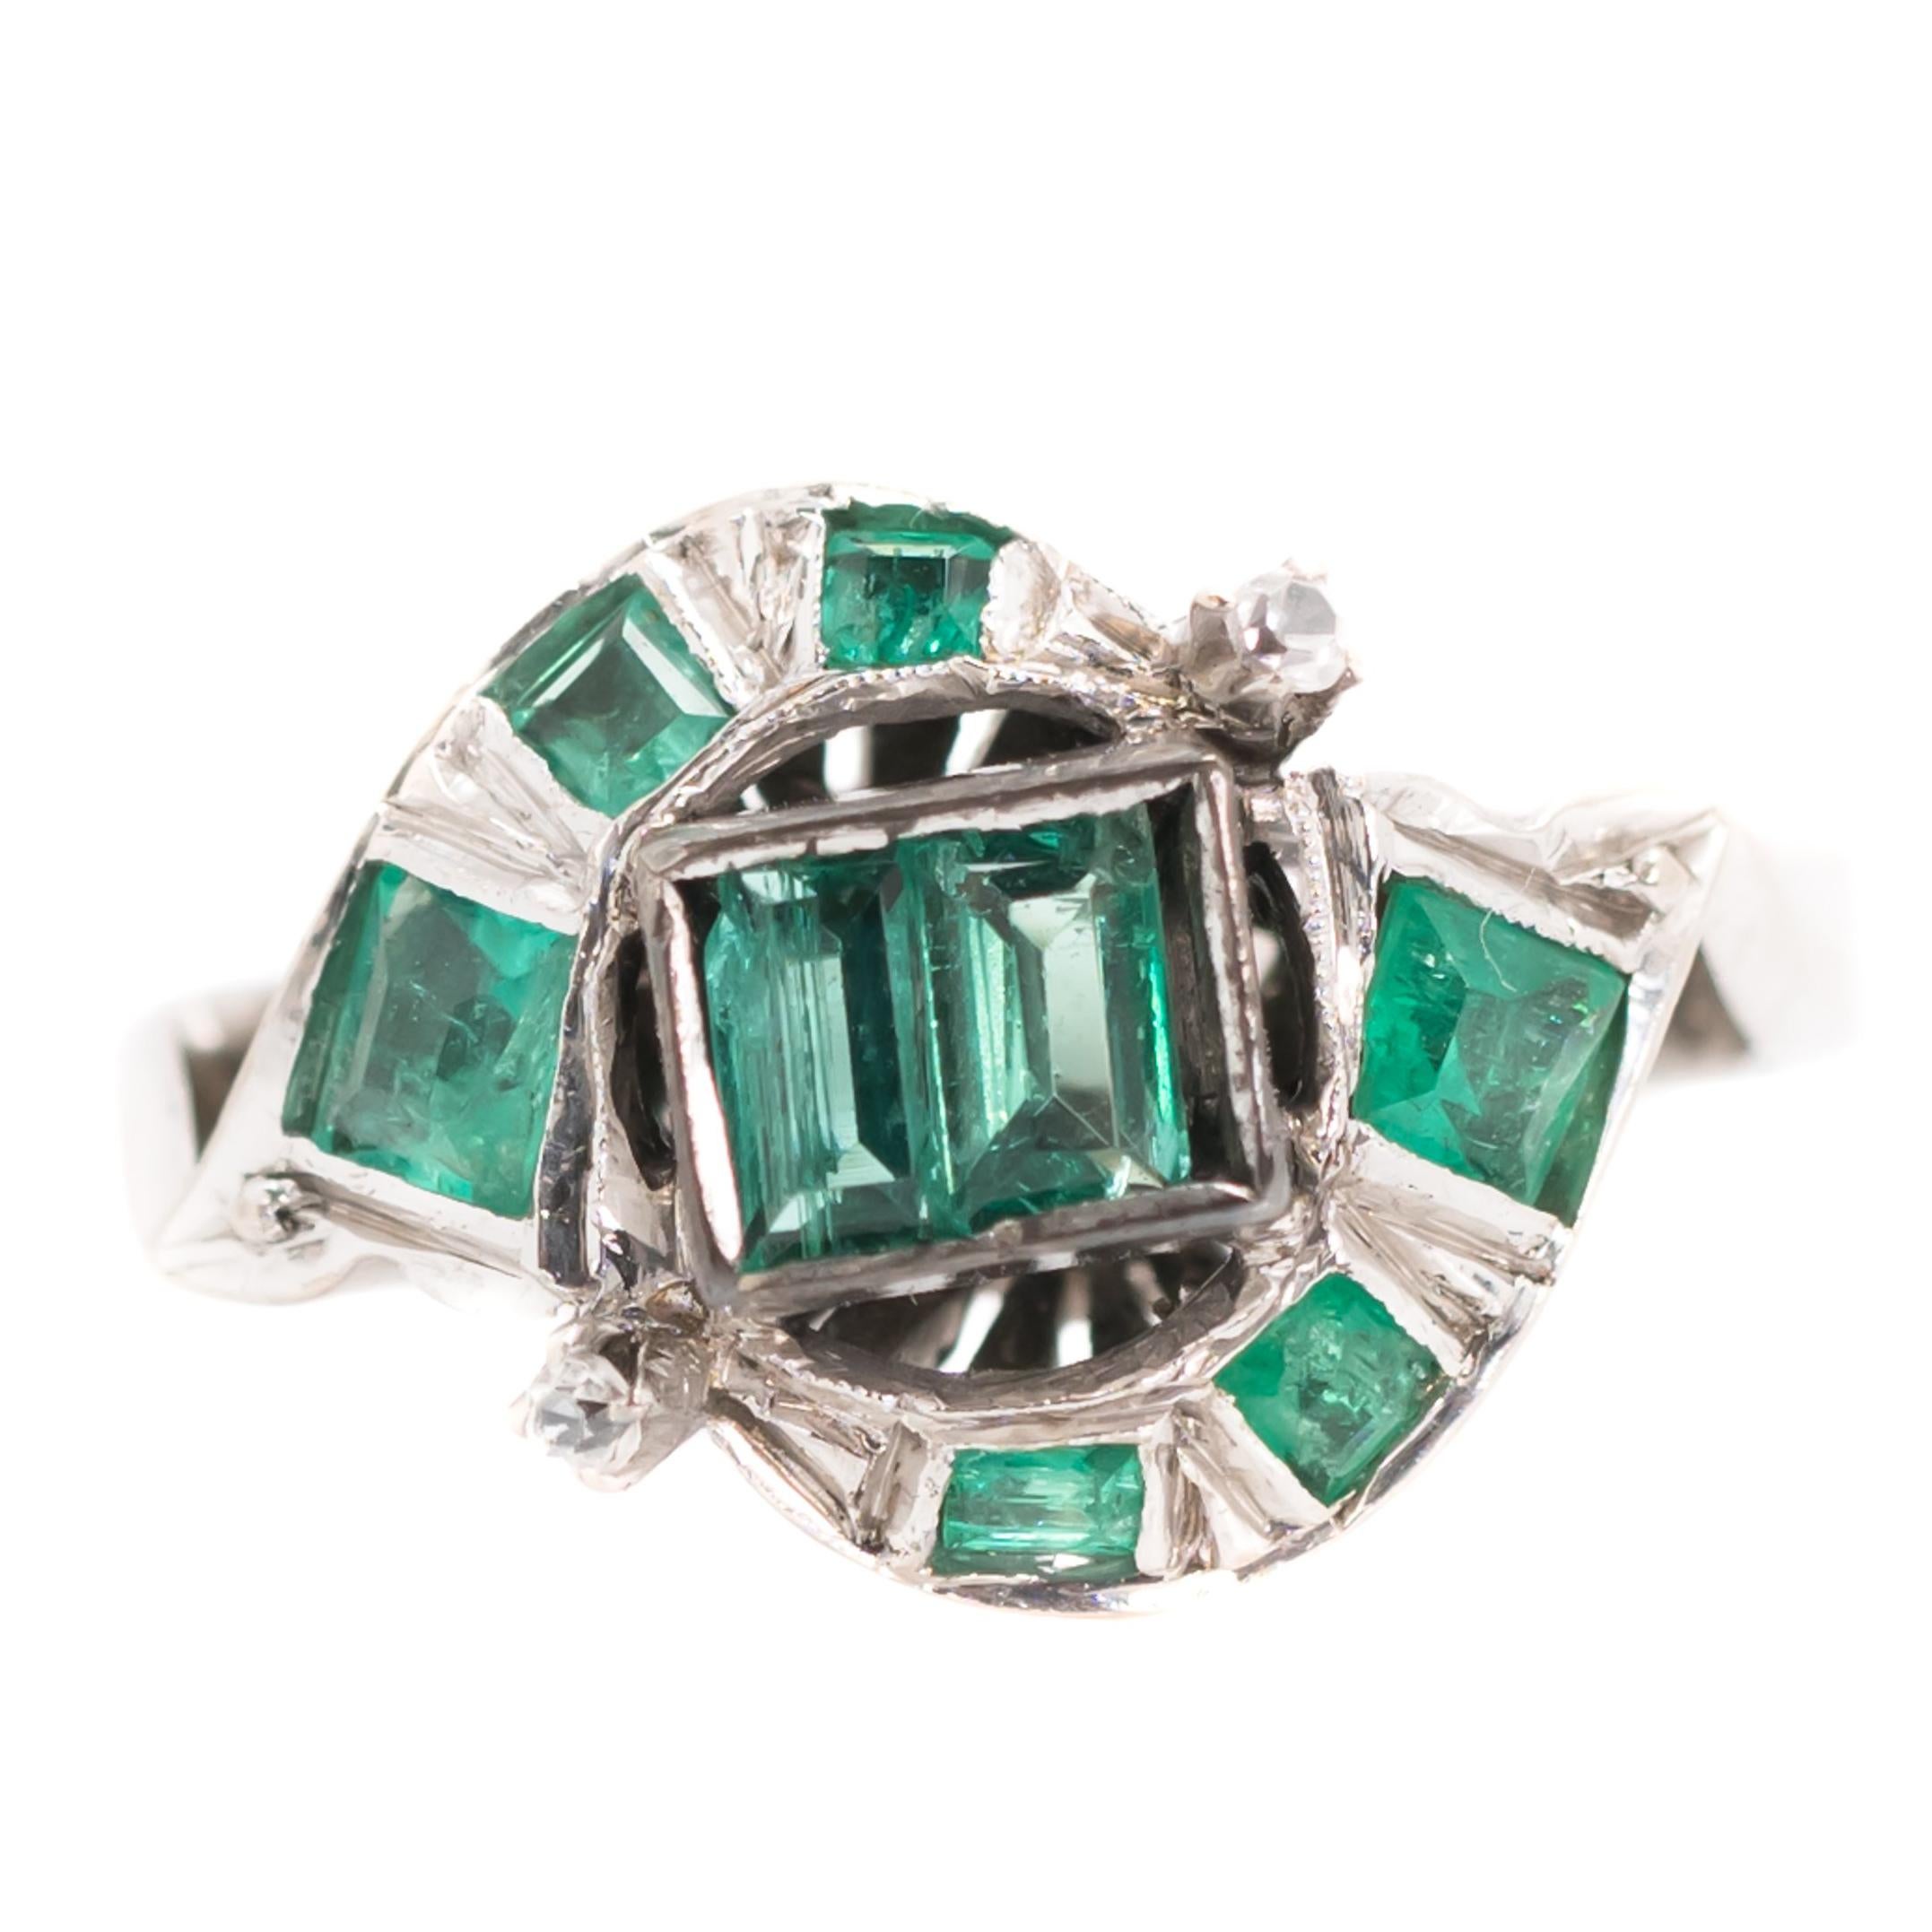 1920s 0.75 Carat Colombian Emerald and 18 Karat White Gold Bypass Ring